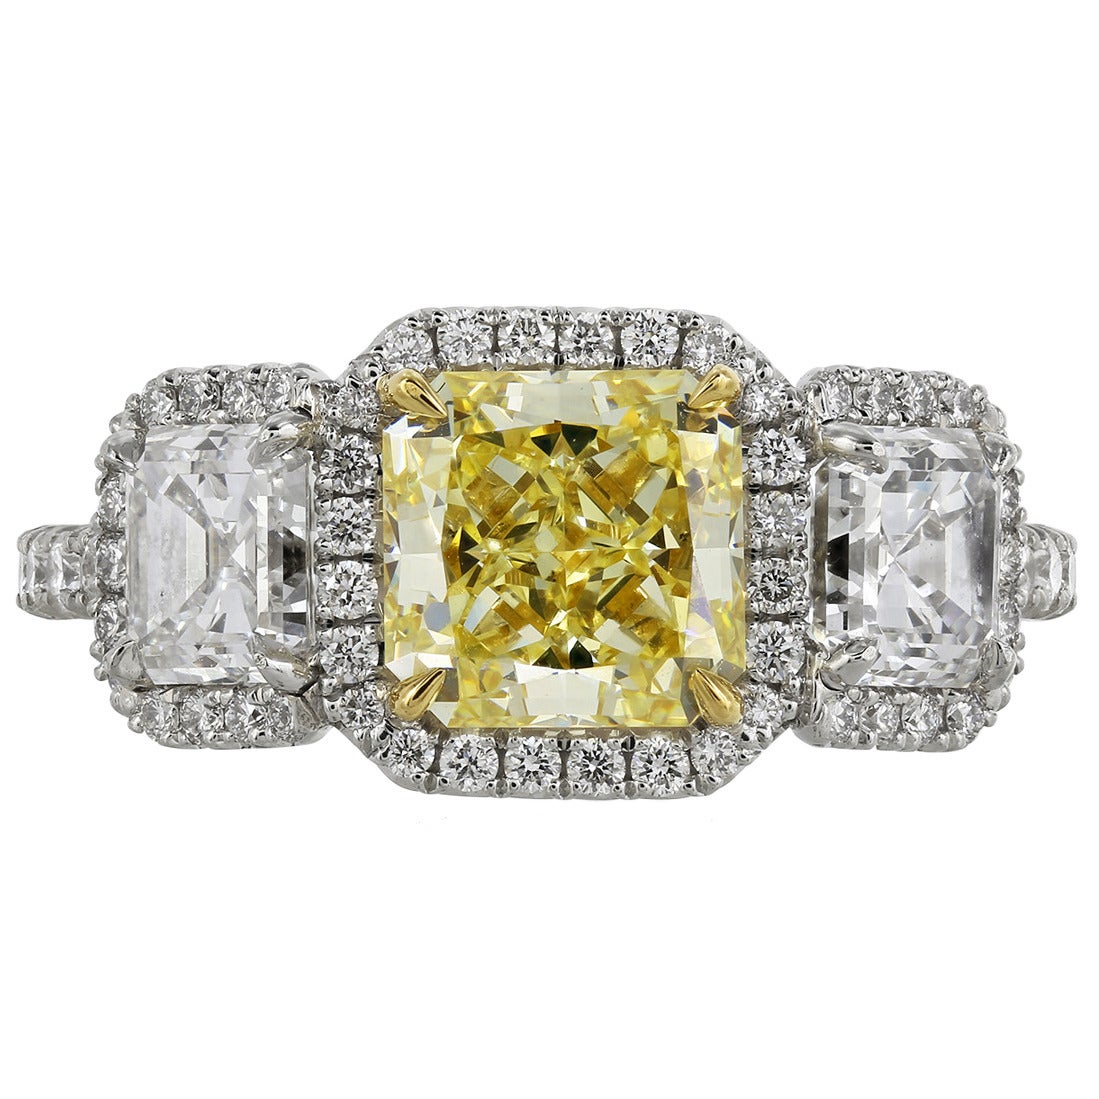 1.87 Carat GIA Certified Fancy Yellow Diamond Platinum Engagement Ring For Sale